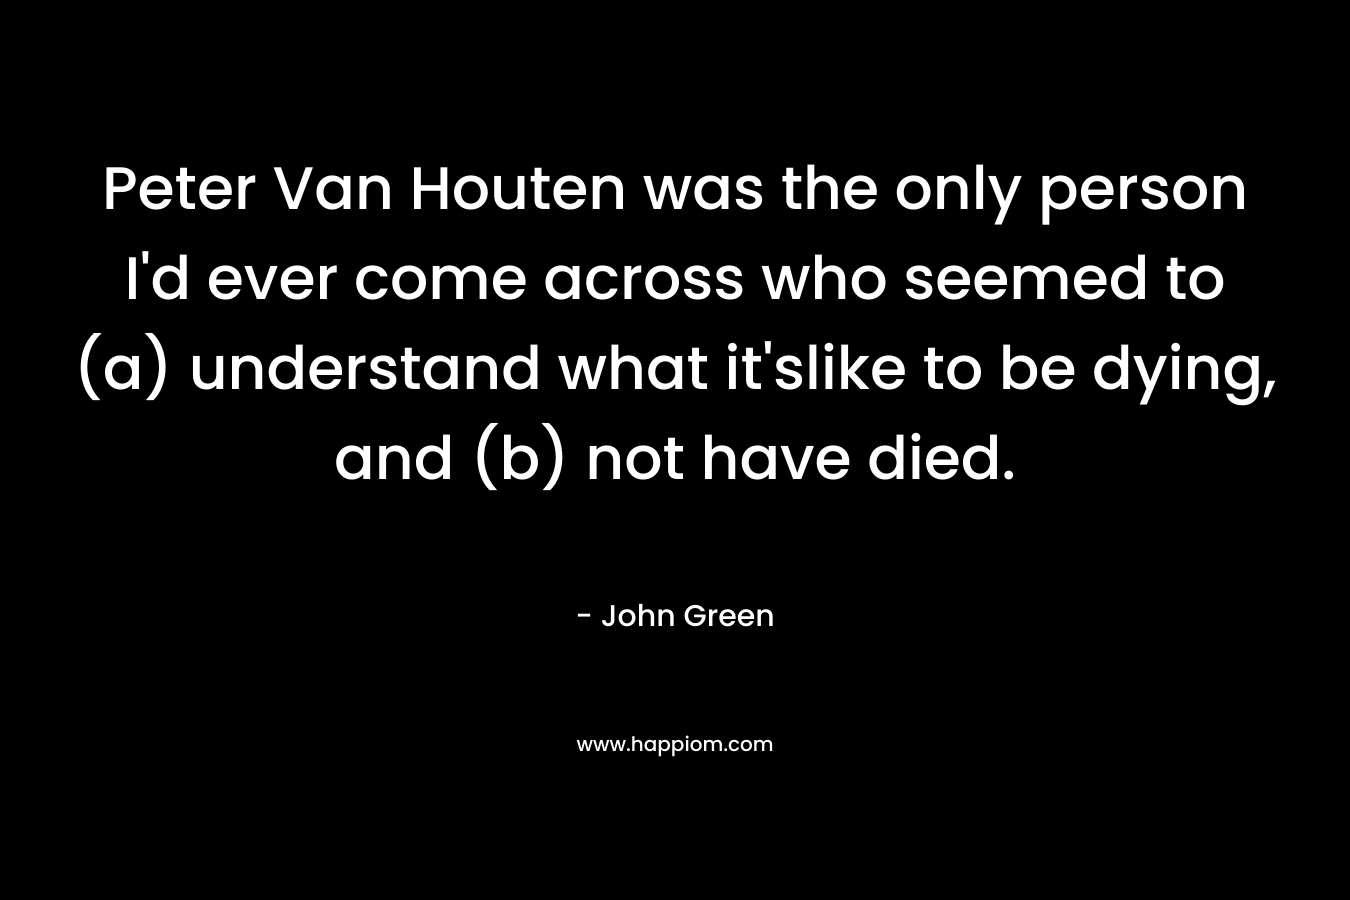 Peter Van Houten was the only person I’d ever come across who seemed to (a) understand what it’slike to be dying, and (b) not have died. – John Green